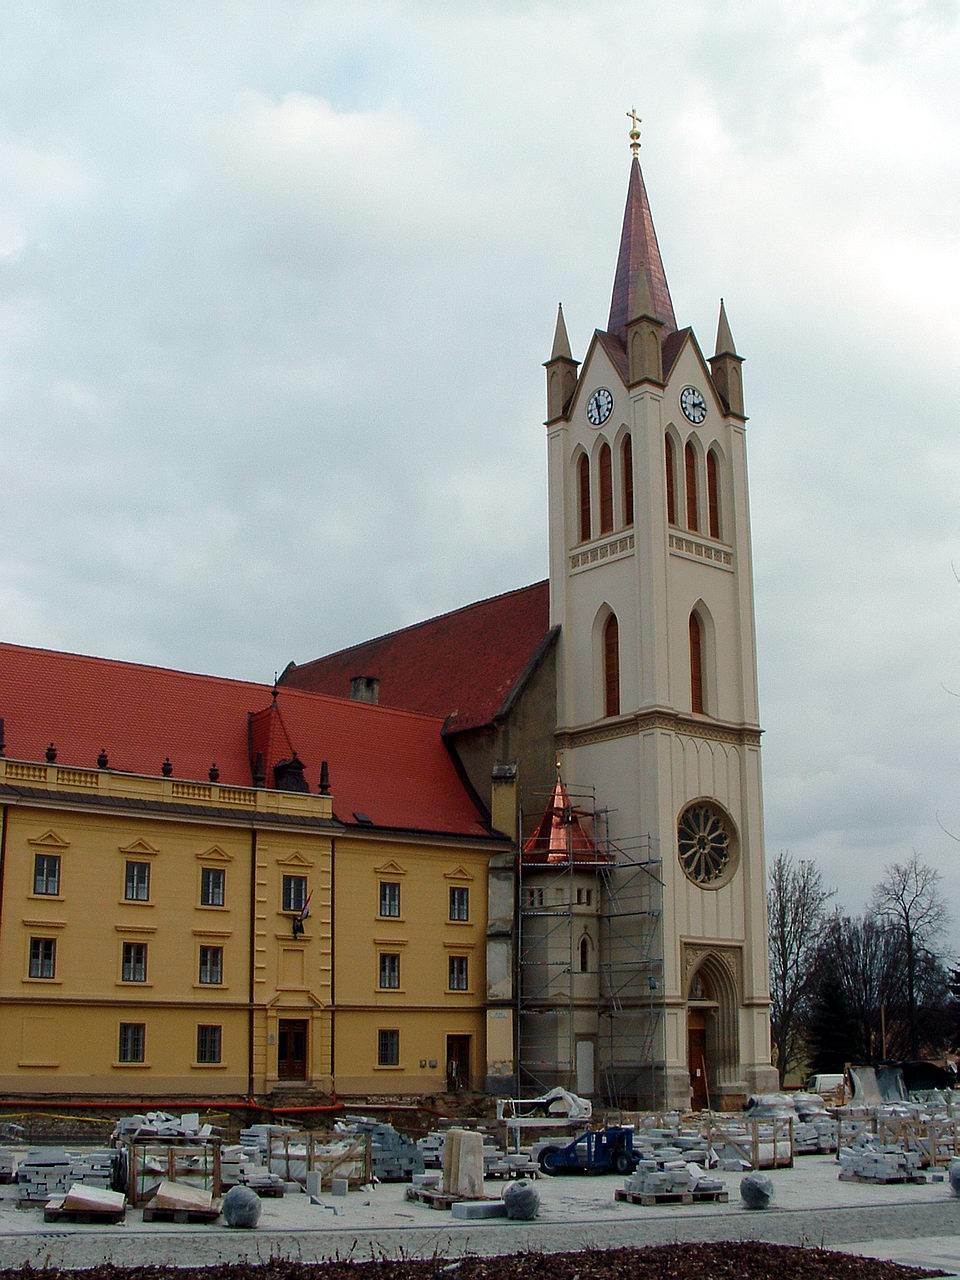 The Church named Our Lady of Hungary